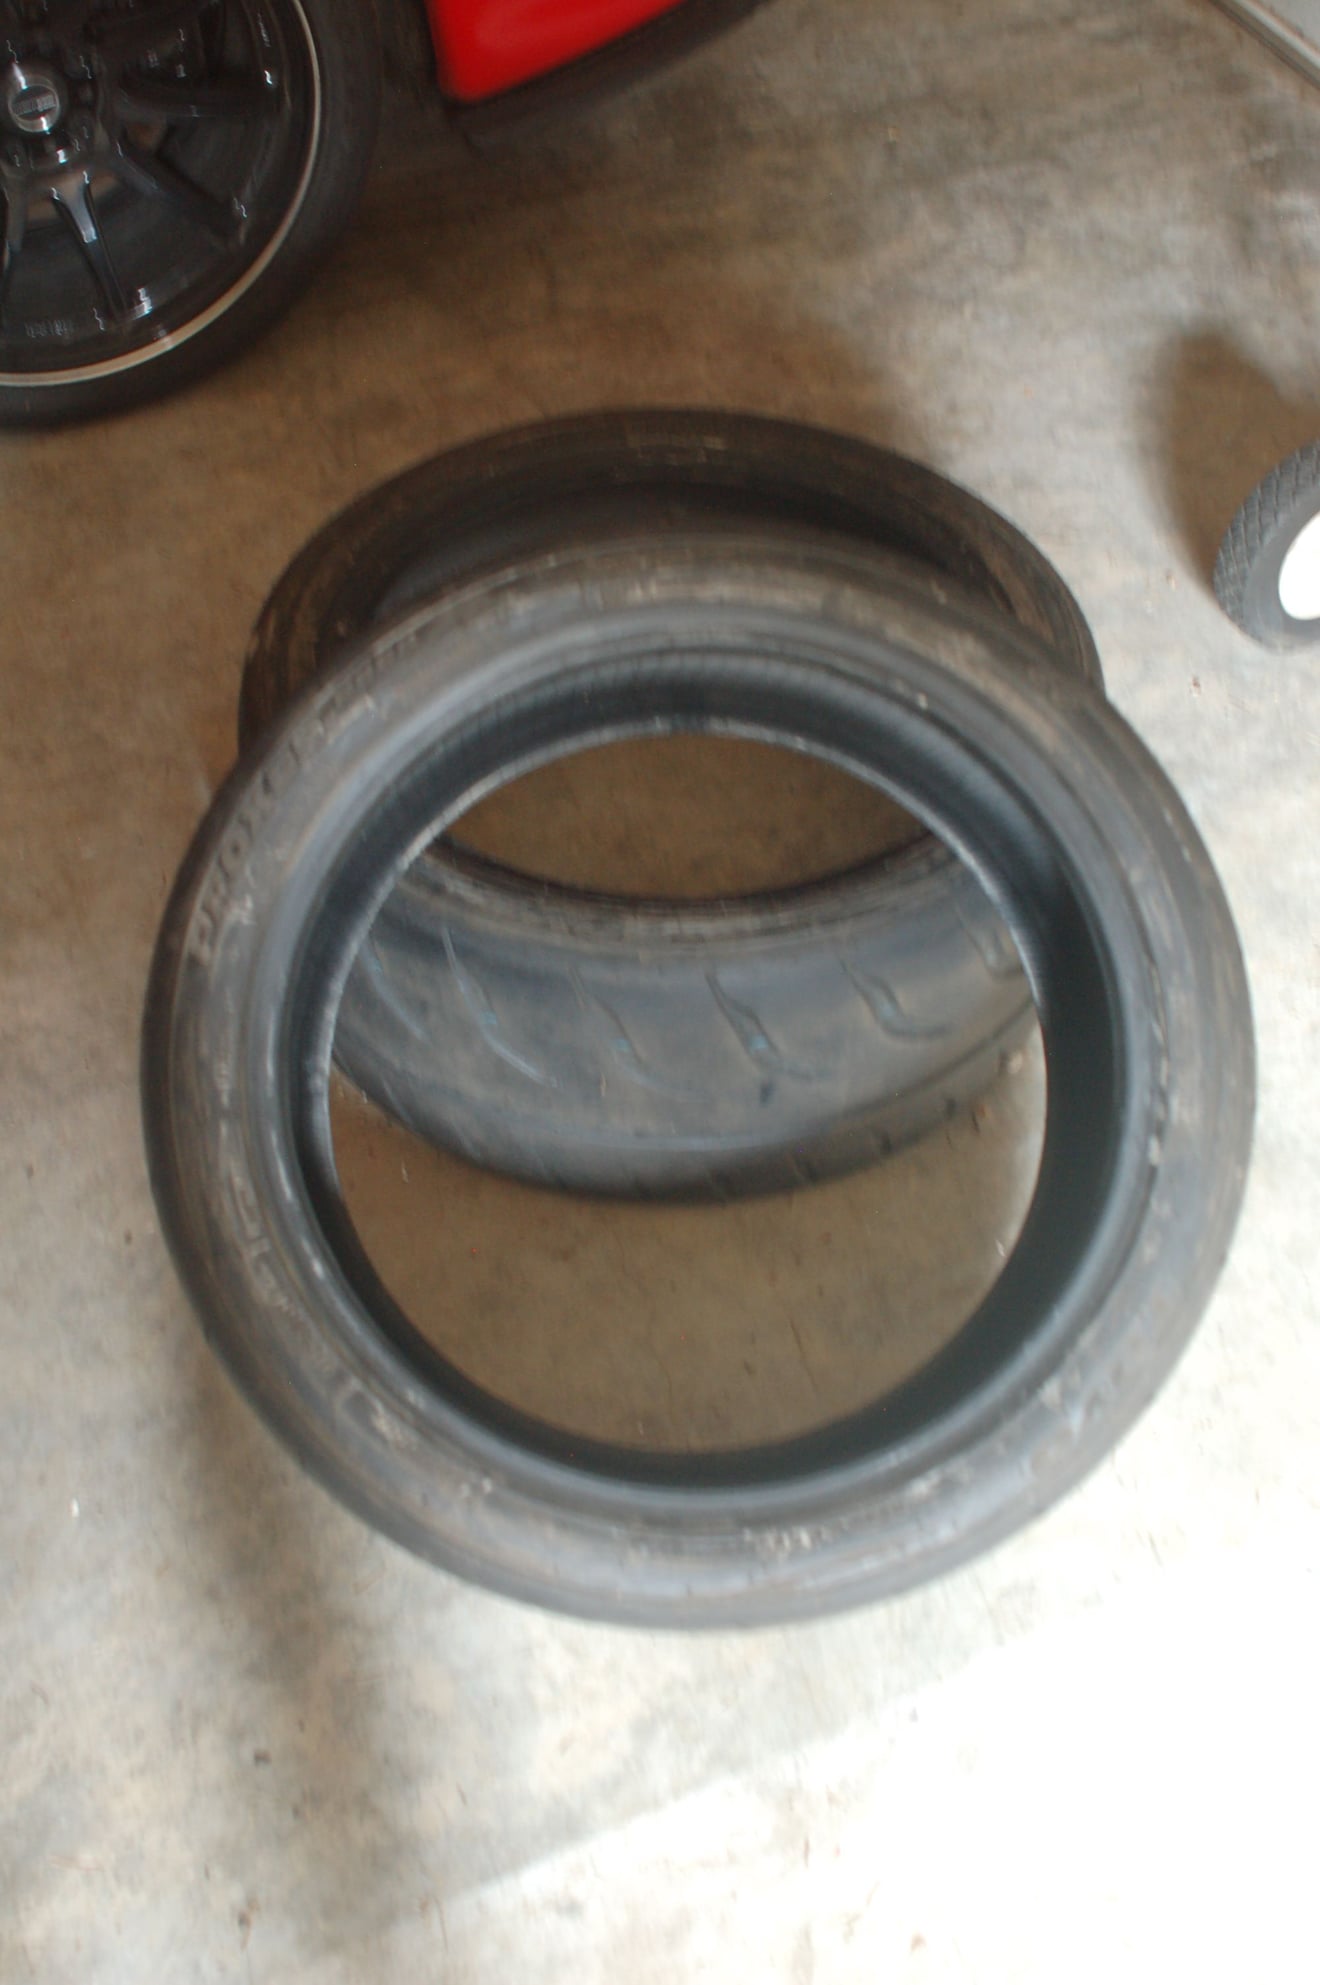 Wheels and Tires/Axles - Racing Tires - Used - 1993 to 1995 Mazda RX-7 - Port Orchard, WA 98367, United States